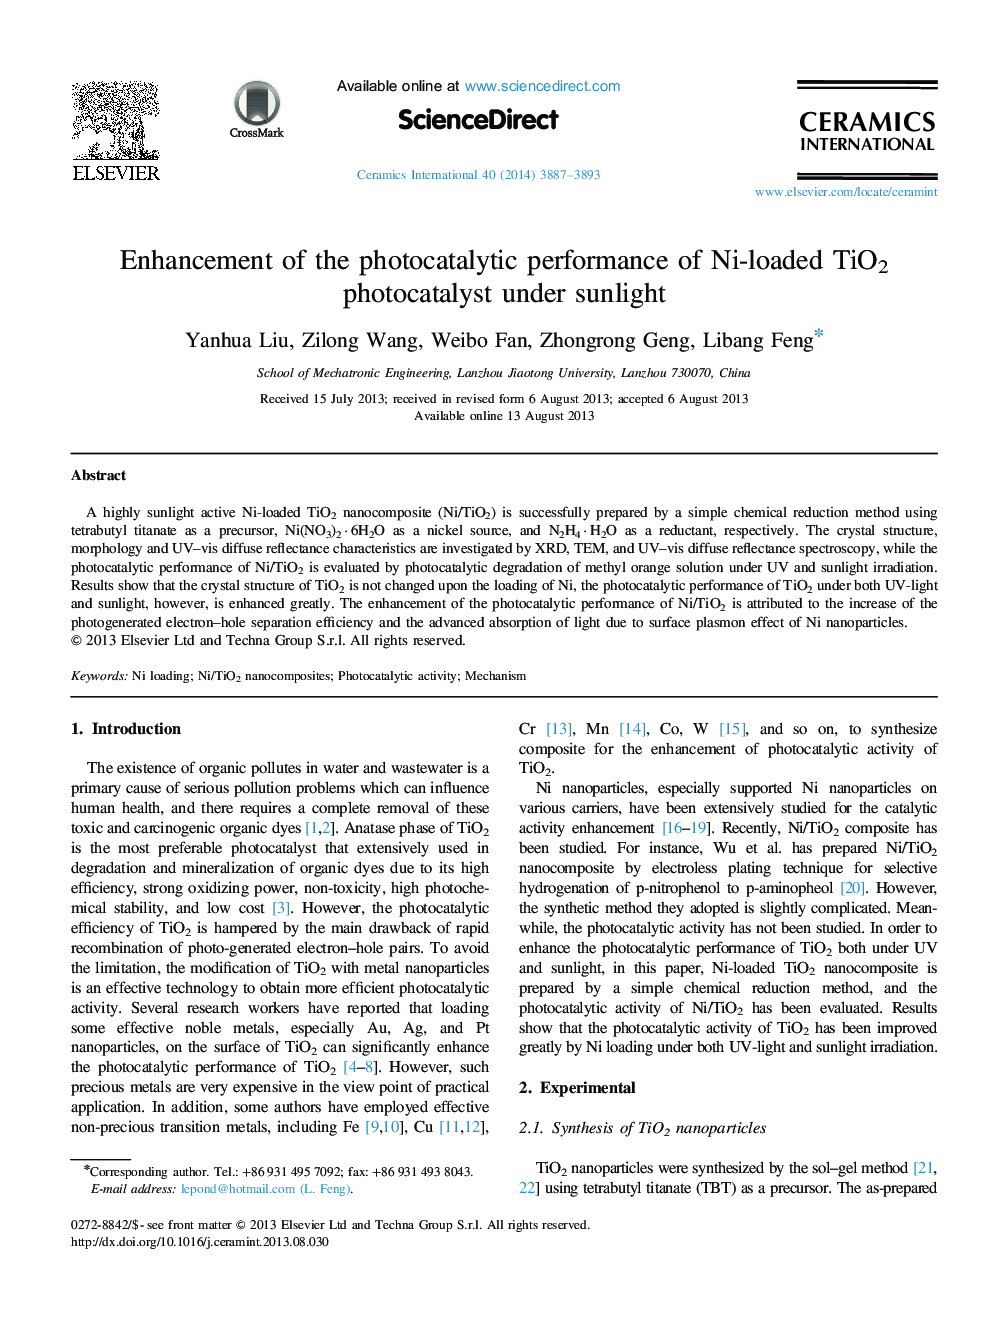 Enhancement of the photocatalytic performance of Ni-loaded TiO2 photocatalyst under sunlight